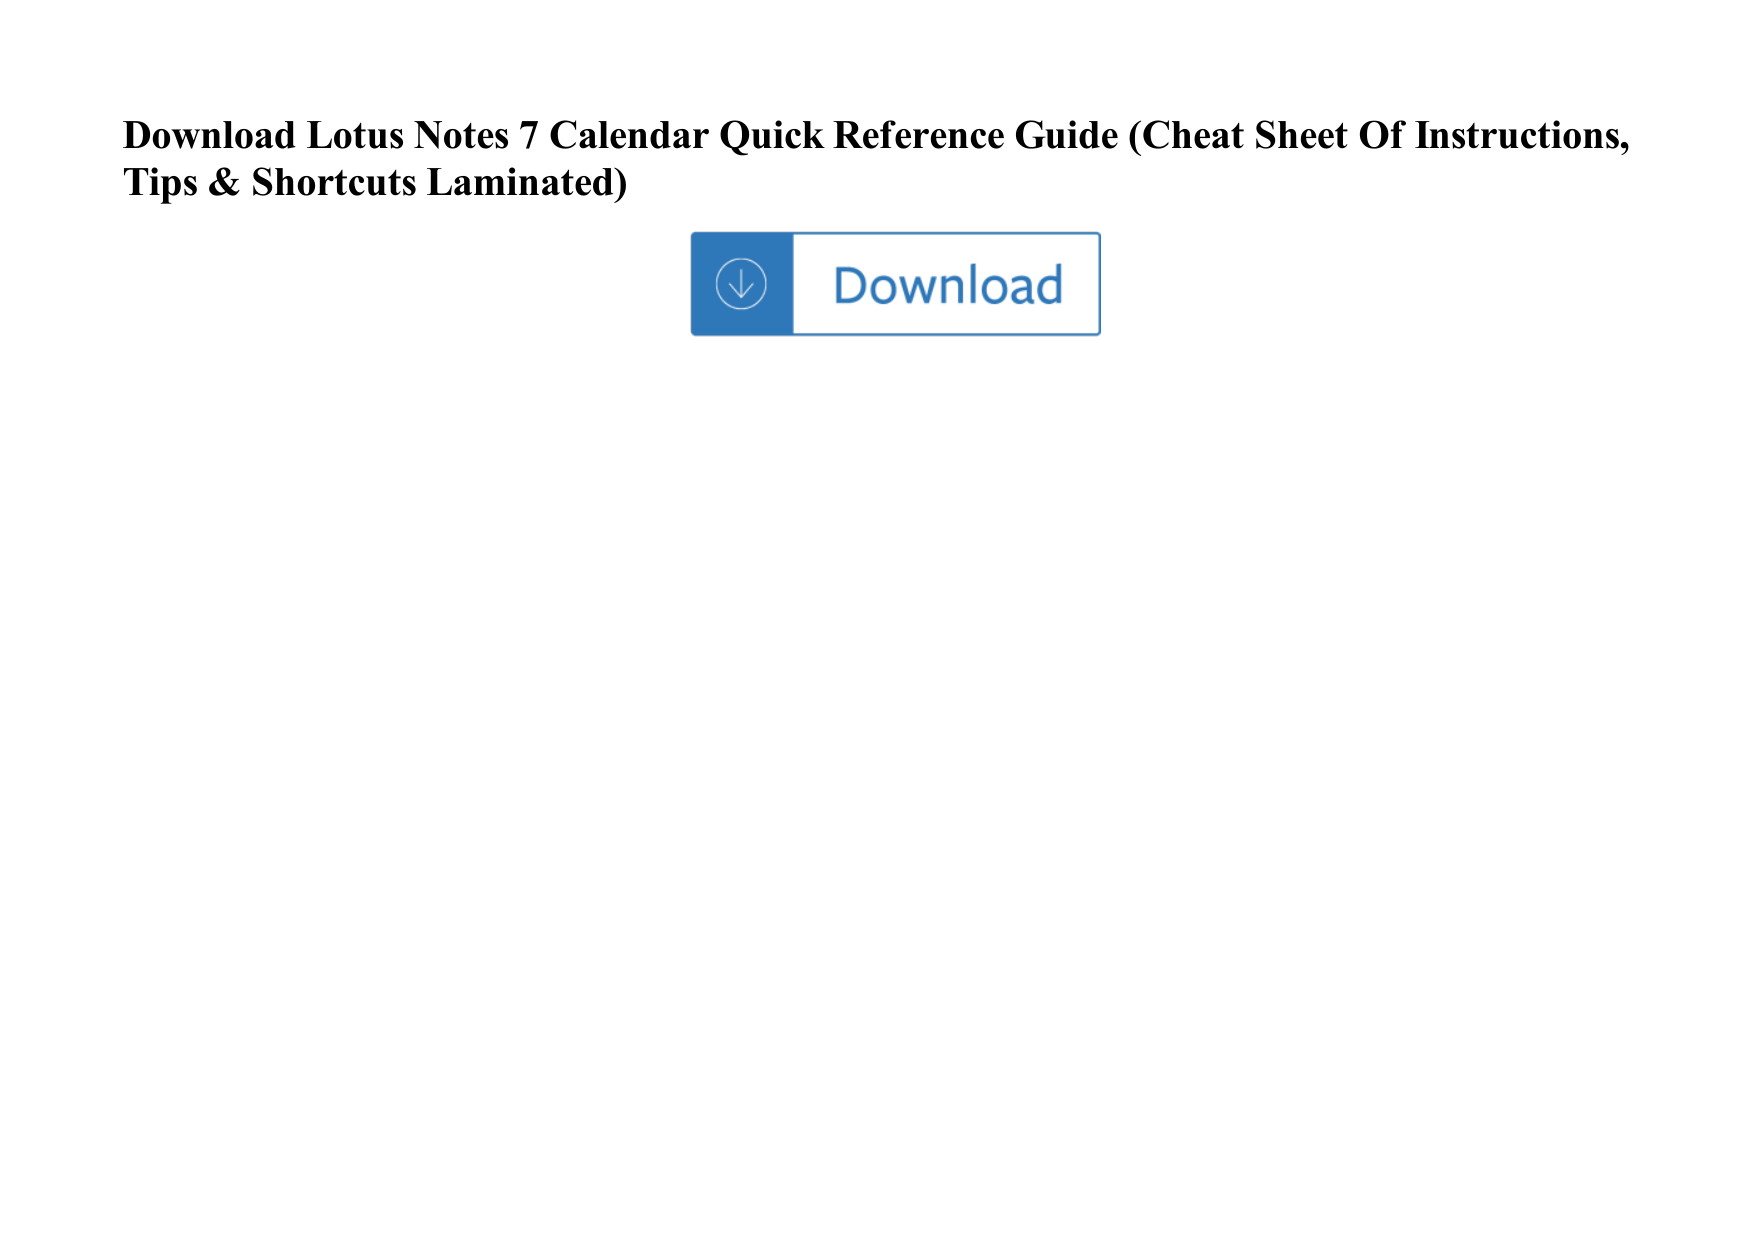 Page 1 of 1 - Lotus Notes 7 Calendar Quick Reference Guide (Cheat Sheet Of Instructions, Tips & Shortcuts  Laminated) Lotus-notes-7-calendar-quick-reference-guide-cheat-sheet-of-instructions-tips-shortcuts-laminated